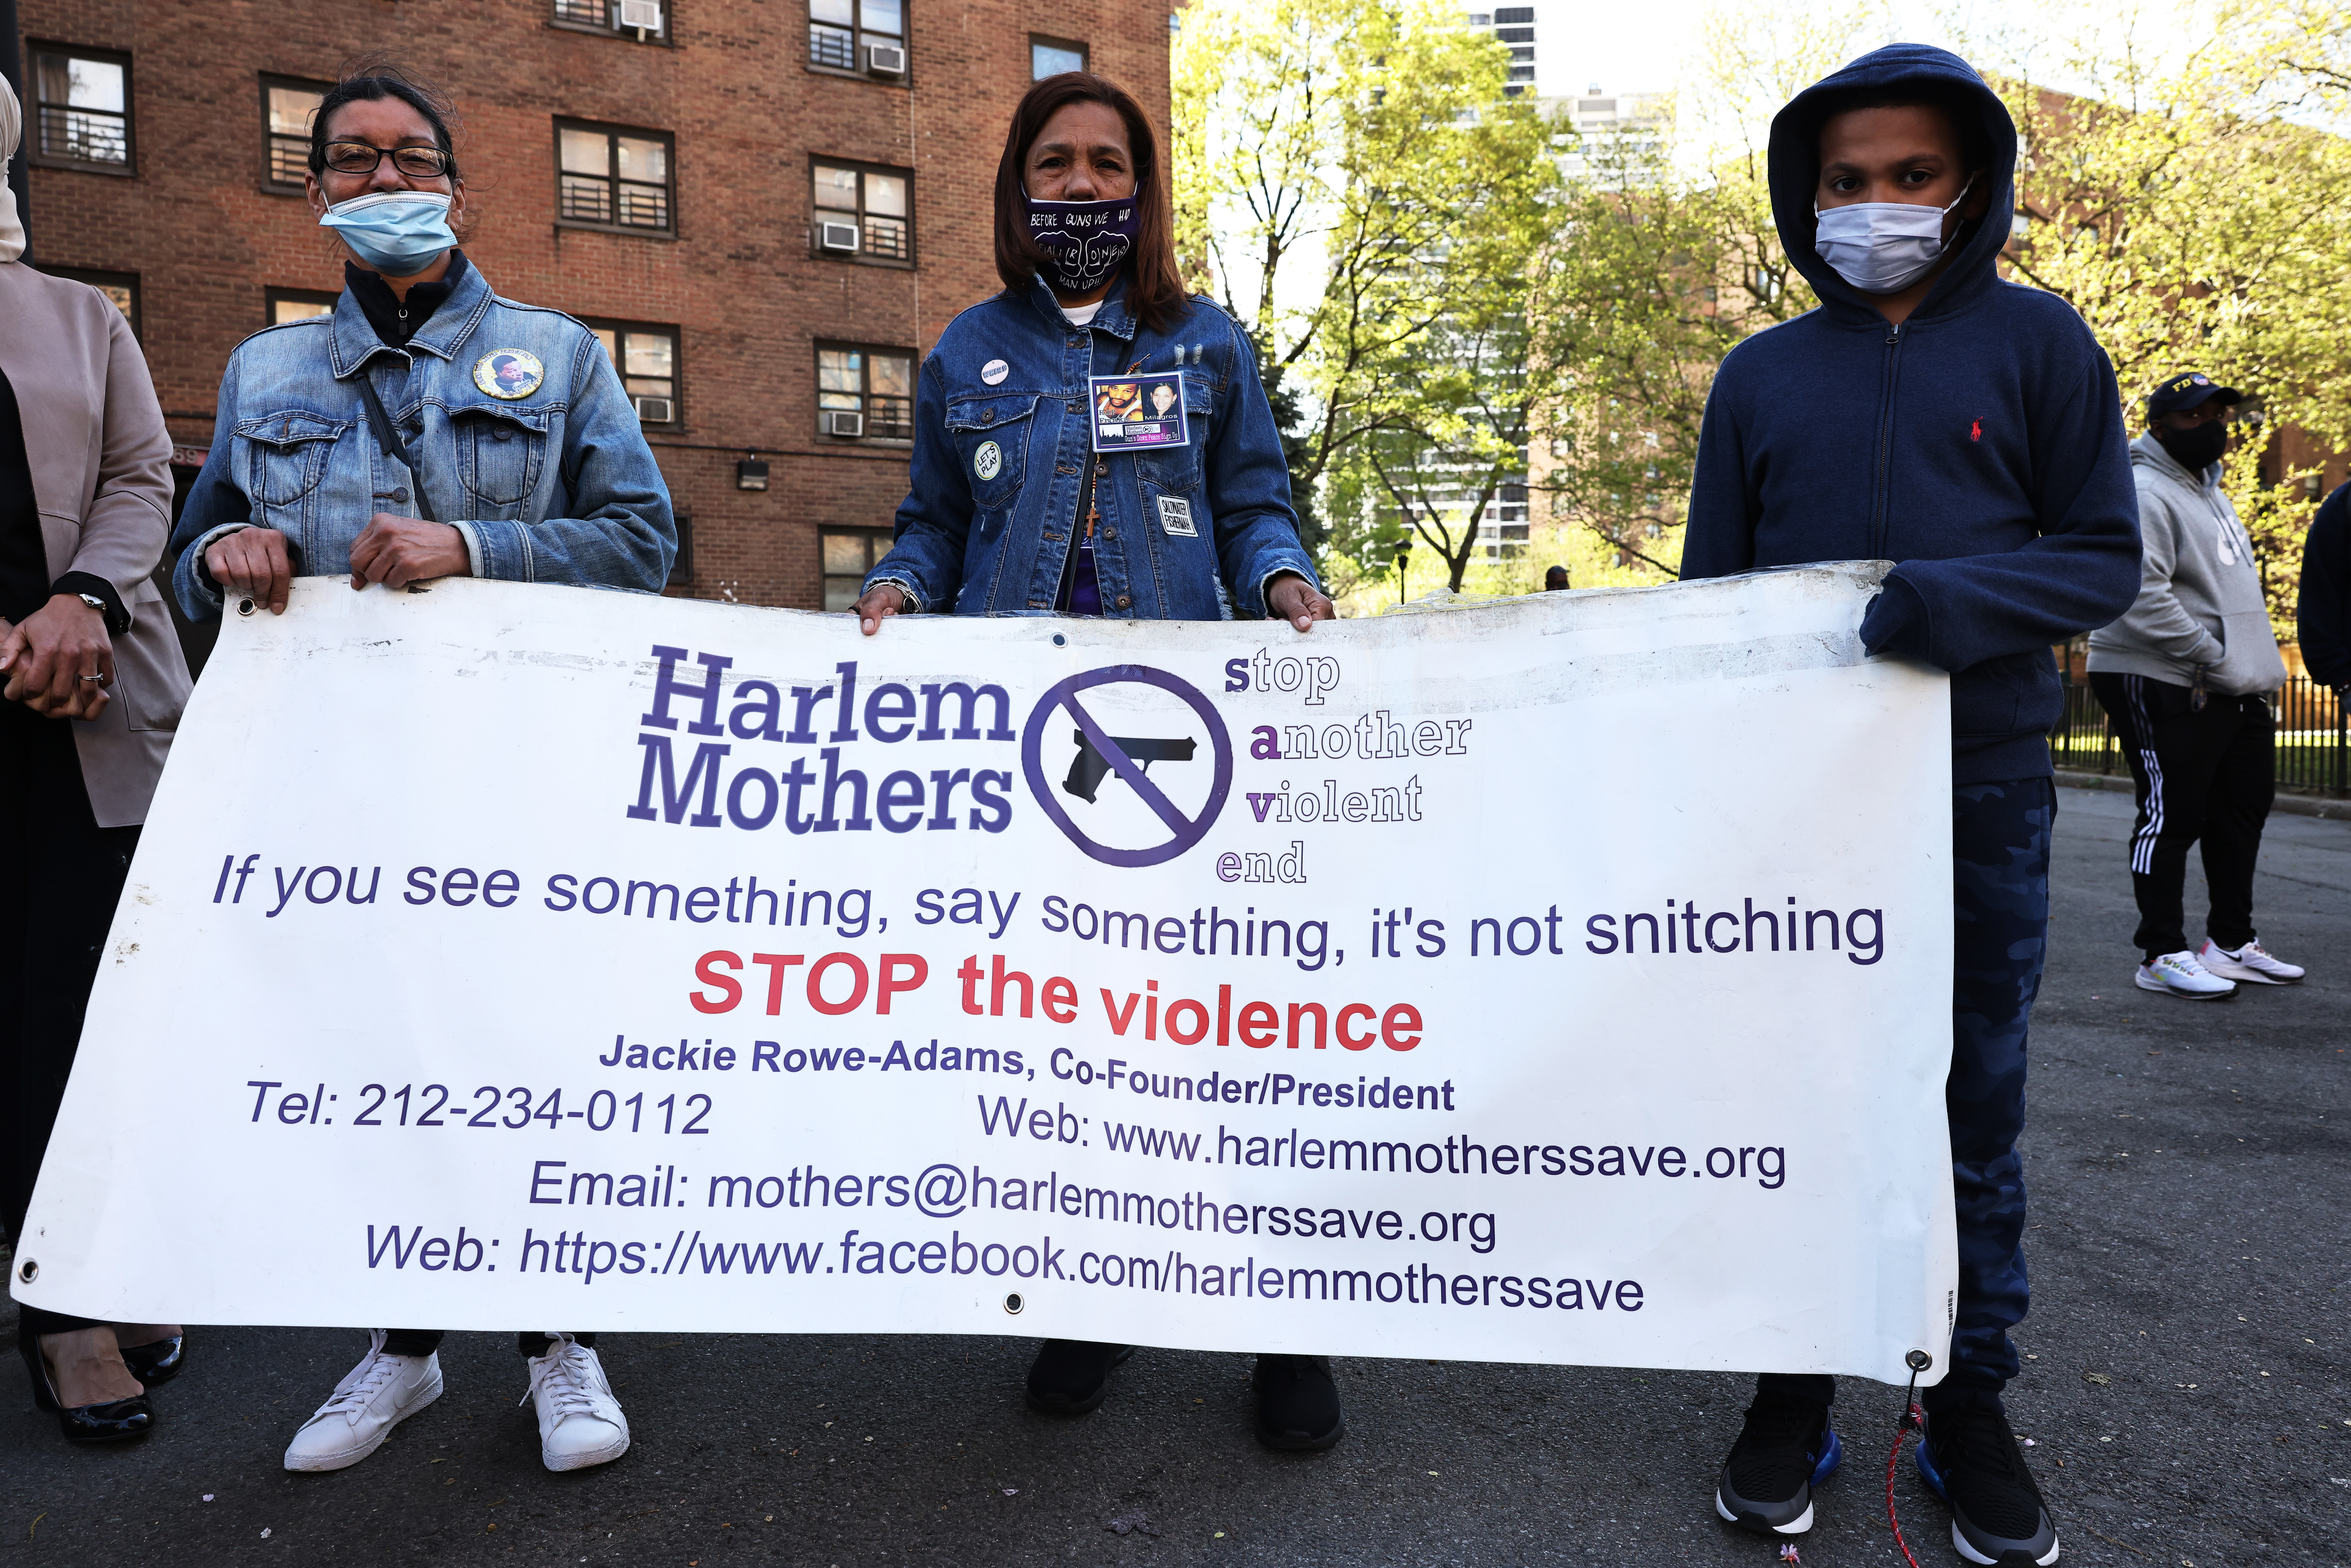 NEW YORK, NEW YORK - APRIL 30: Margie Rodrigues, Milagros Ortega and Gino Myers, 10, hold a banner as they join others before a peace walk to denounce the rise of gun violence in the city in the Harlem neighborhood on April 30, 2021 in New York City. Anti-gun violence organizations, community leaders and members of the community marched through the streets of Harlem against gun violence that has spiked since 2020. Last week, Mayor de Blasio announced his “Safe Summer NYC” plan, which would place more police officers in high-crime areas along with providing 2000 summer jobs and basketball games at various locations for youths. The program will also reactivate Operation Ceasefire, which will focus on sending members of the community to cultivate relationships with gang members. (Photo by Michael M. Santiago/Getty Images)